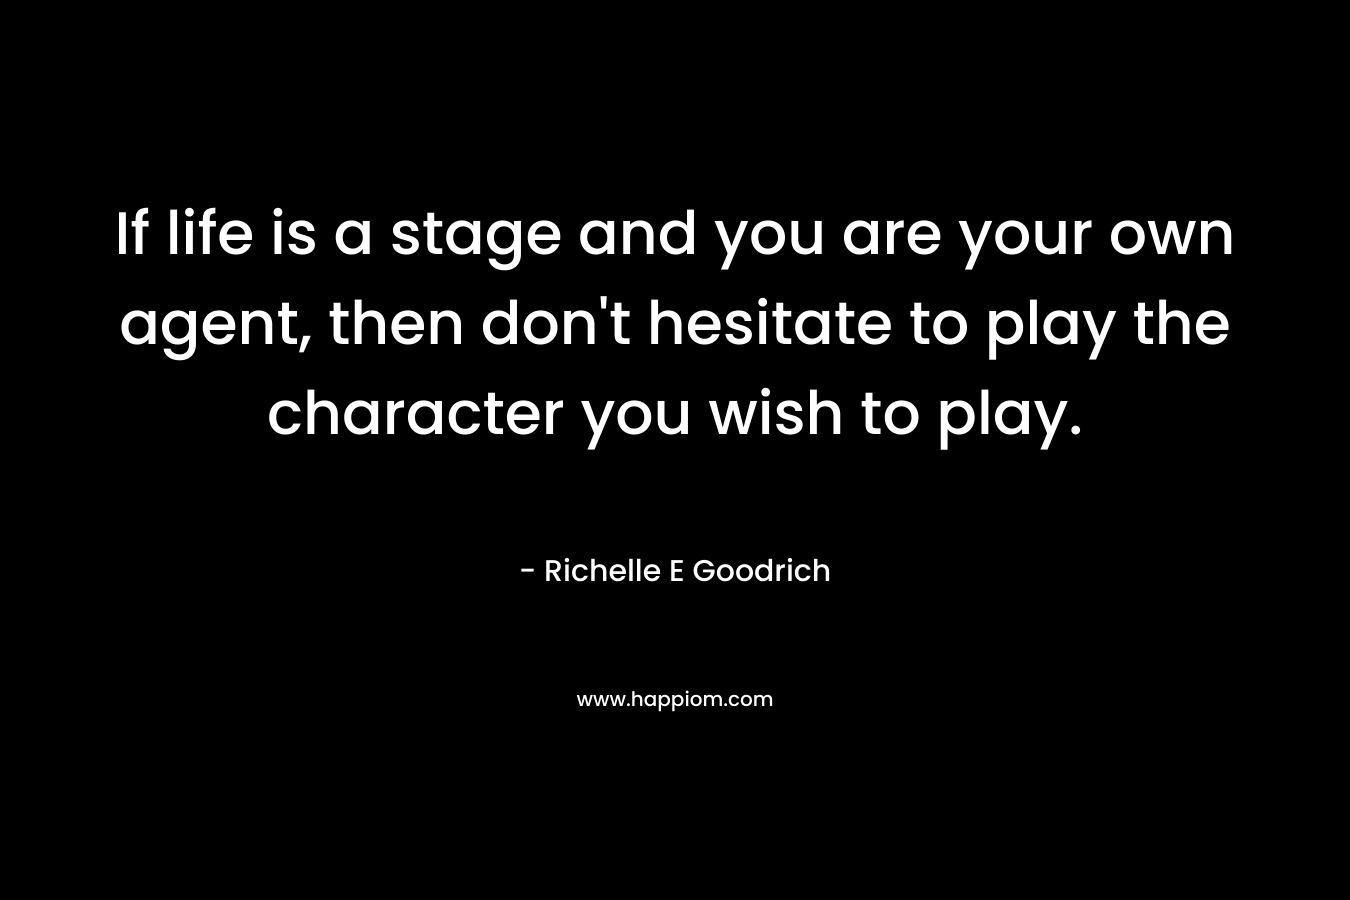 If life is a stage and you are your own agent, then don’t hesitate to play the character you wish to play. – Richelle E Goodrich